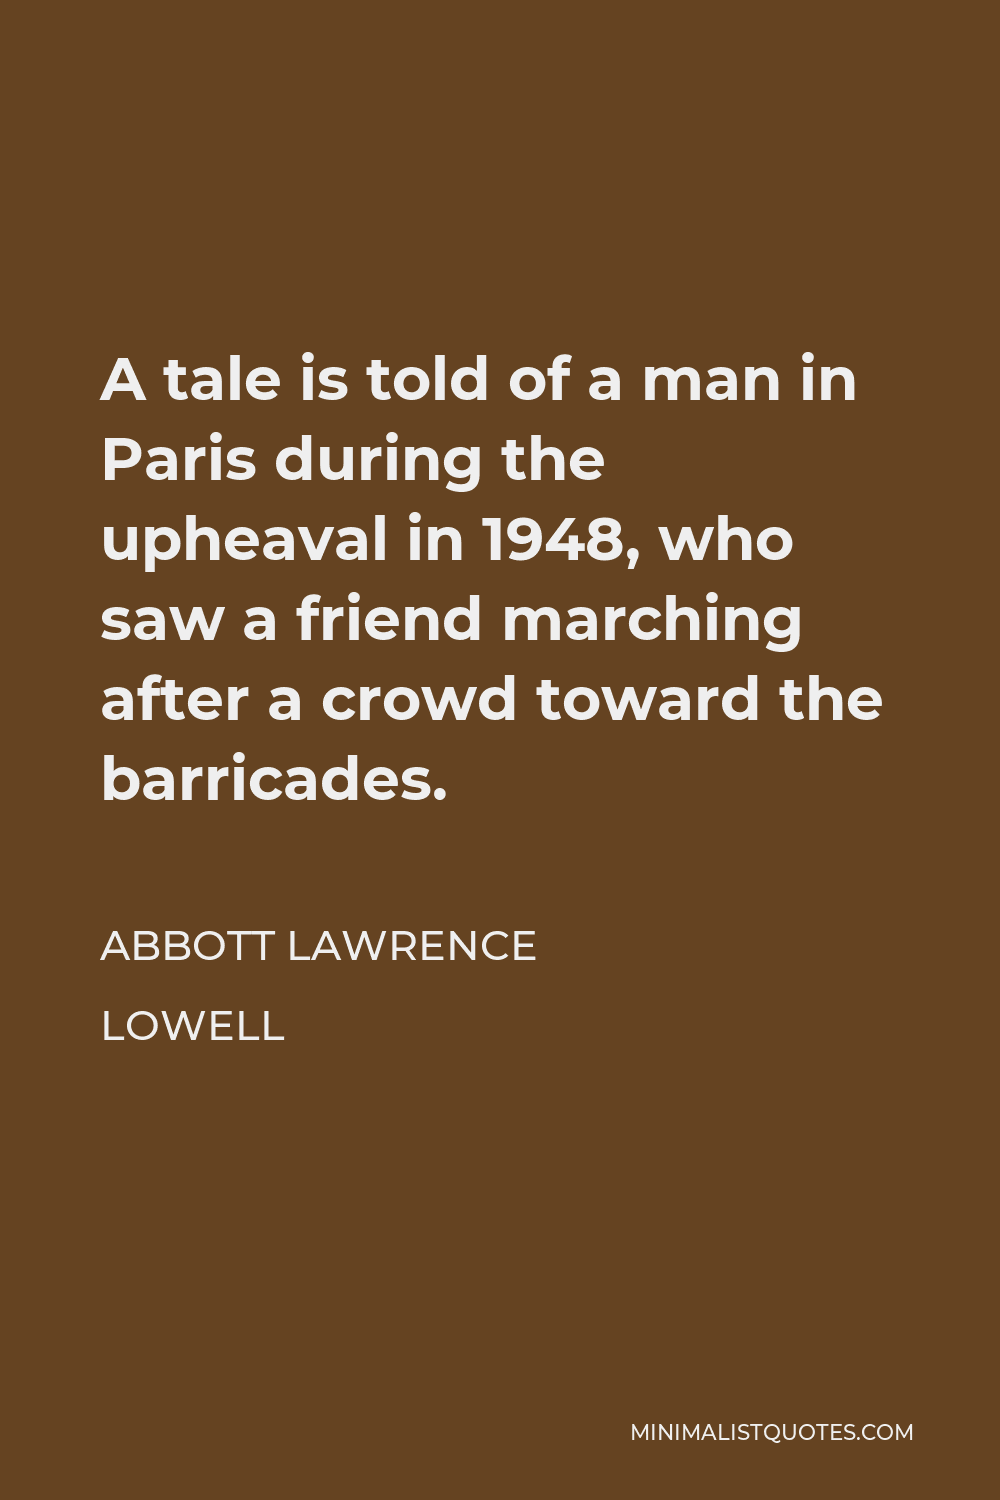 Abbott Lawrence Lowell Quote - A tale is told of a man in Paris during the upheaval in 1948, who saw a friend marching after a crowd toward the barricades.